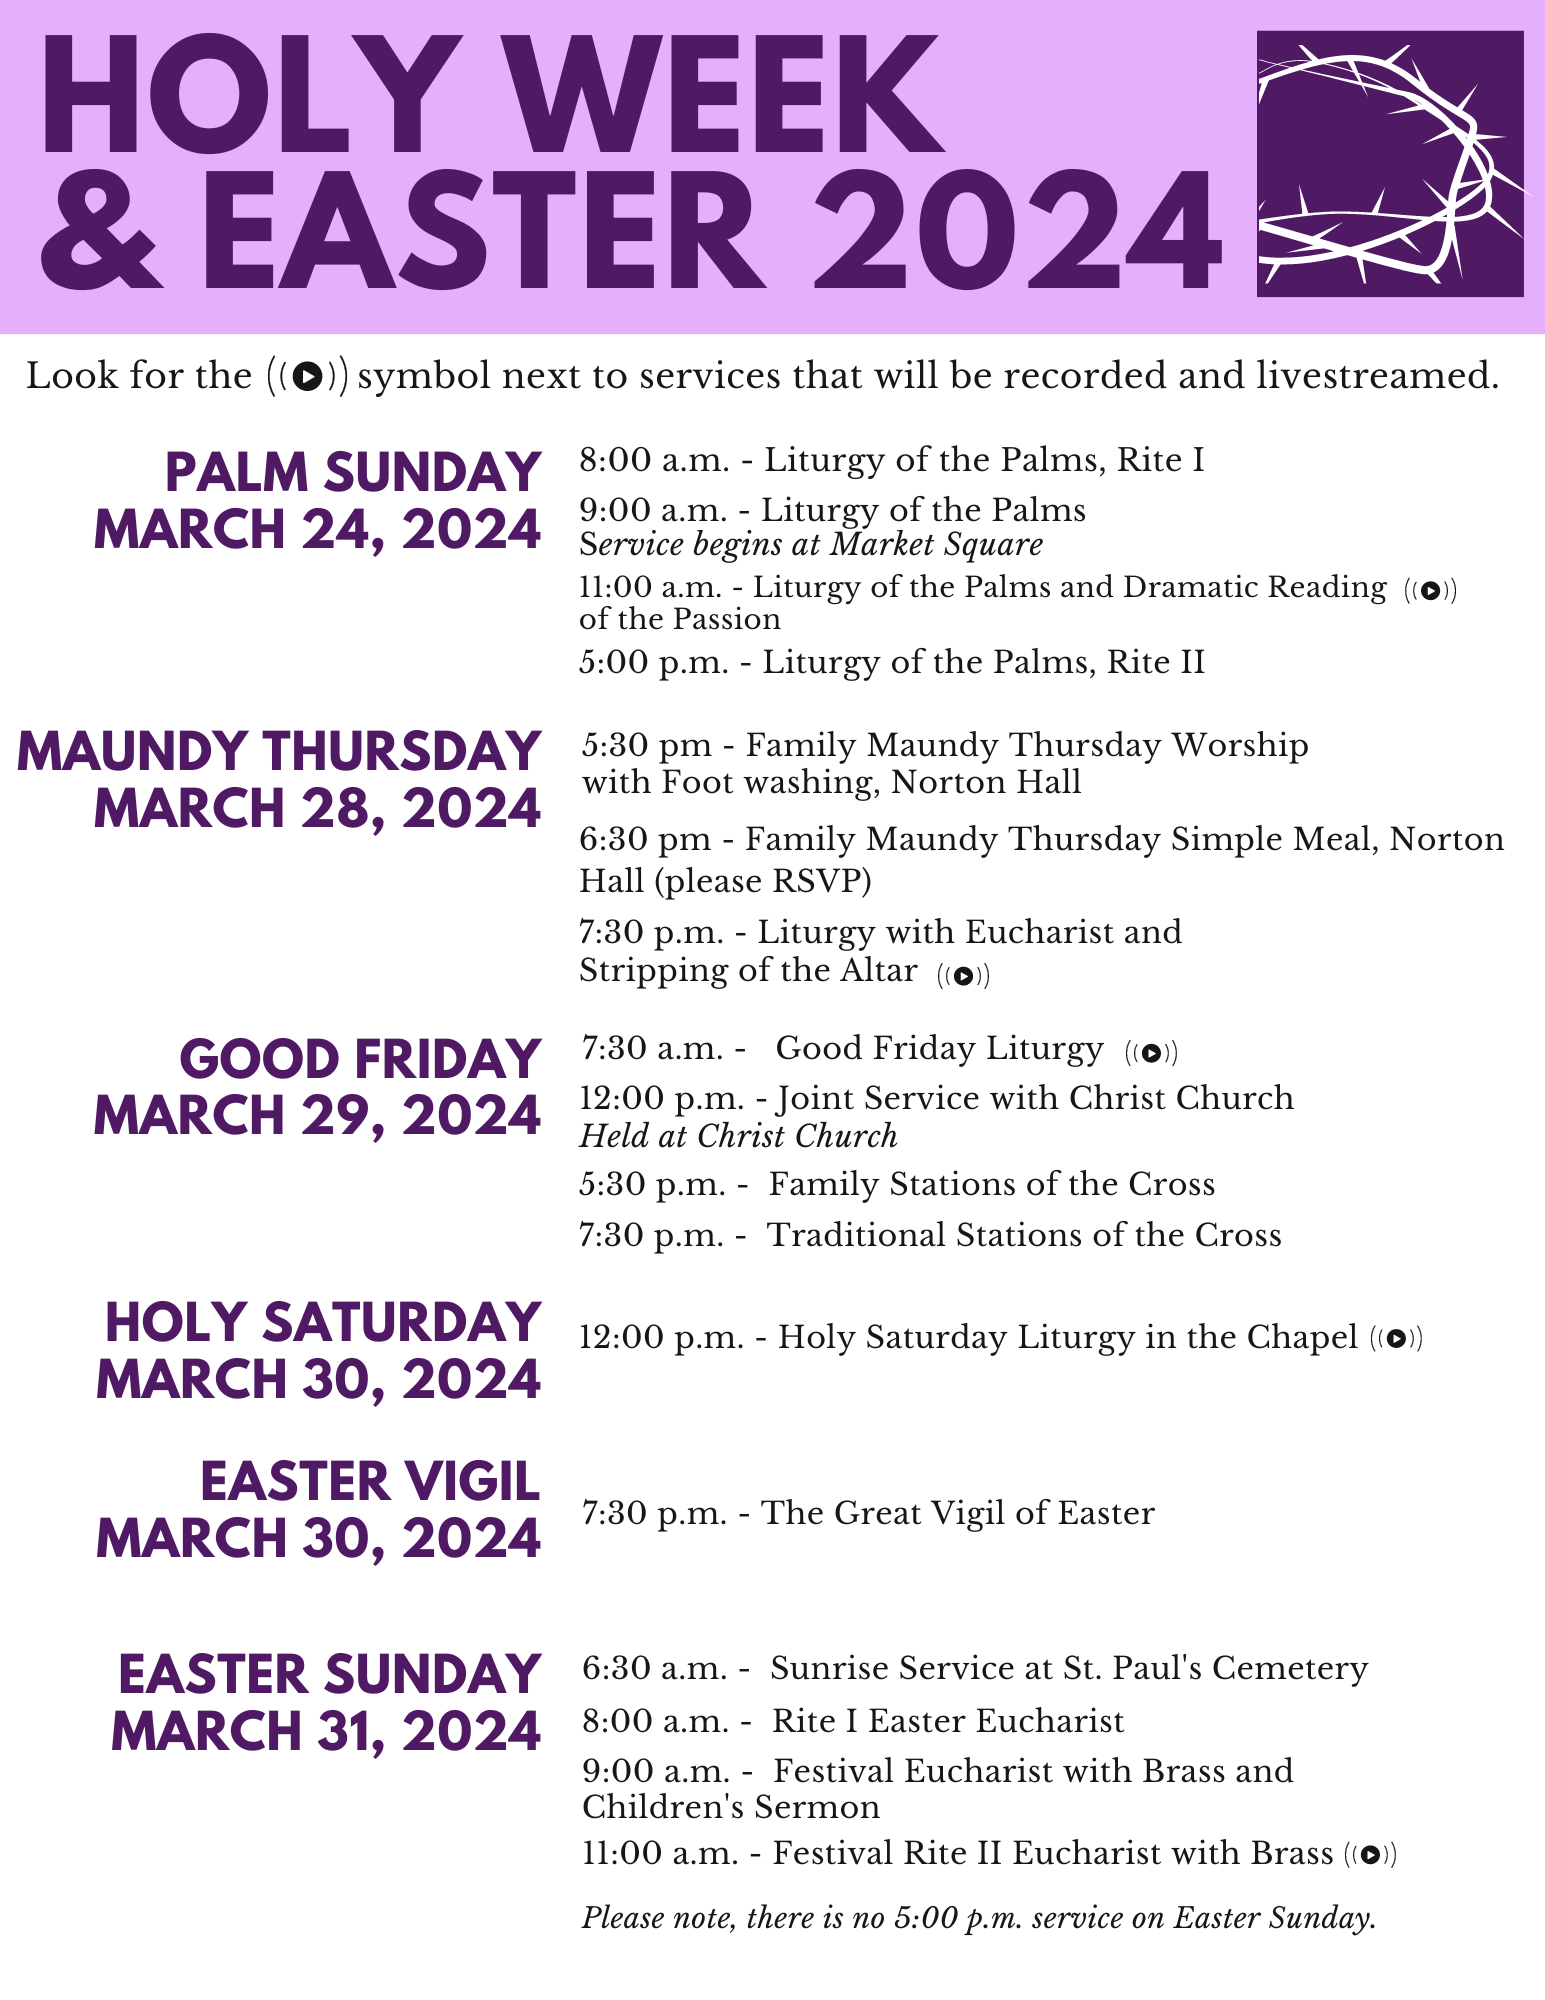 holy-week-and-easter-2024_23